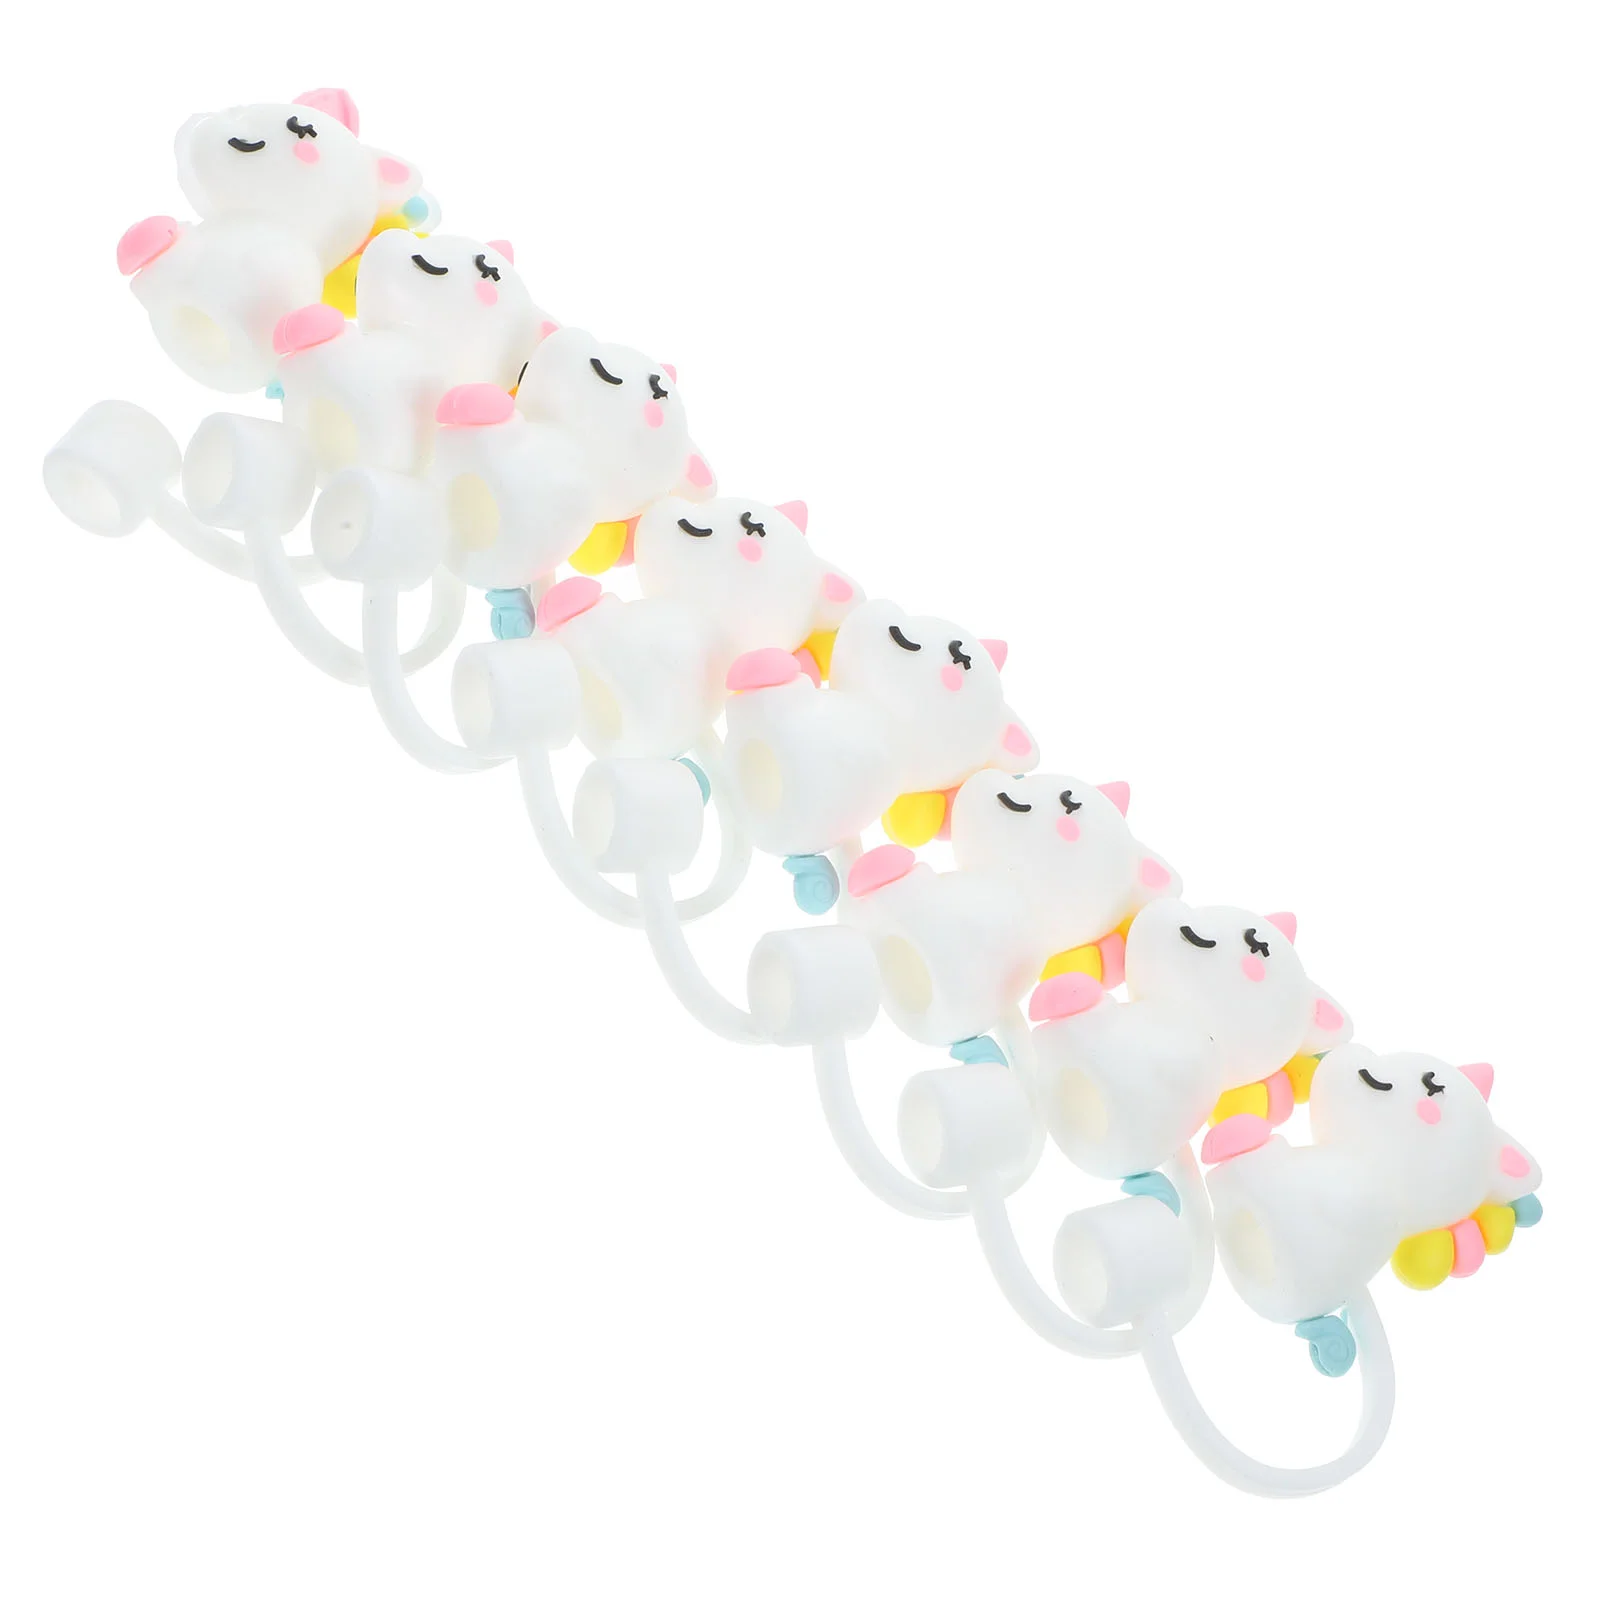 

8 Pcs Unicorn Straw Plugs Dust Reusable Drinking Tips Silicone Cap Covers Silica Gel Protector Straws Tumblers